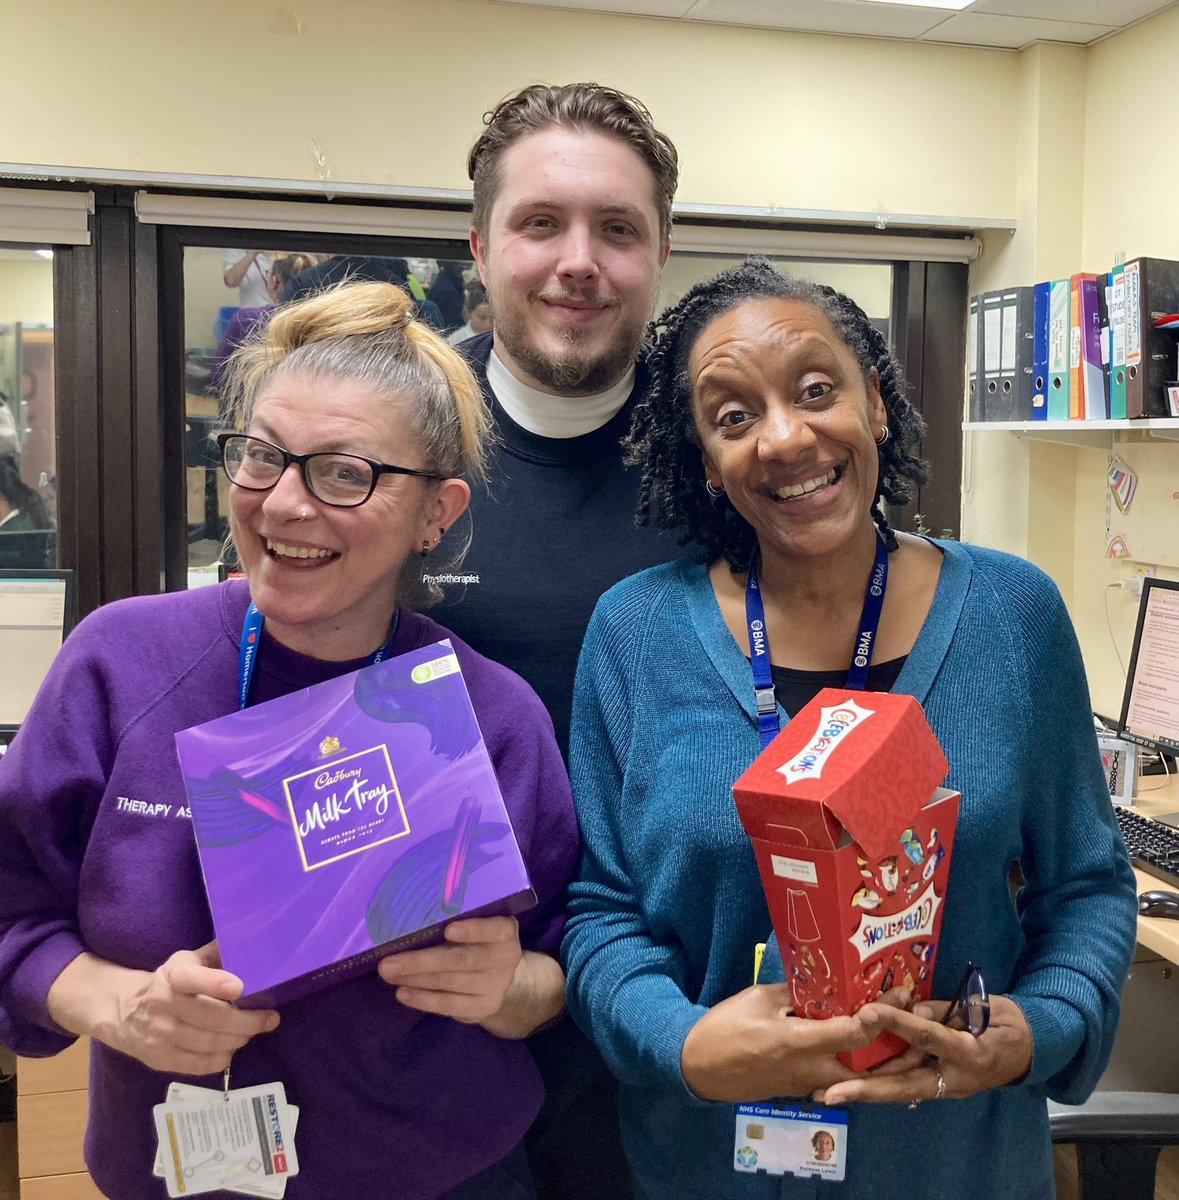 Our fabulous Strong and Steady Team in the Bryning Unit receiving chocolates as a thank you from an grateful patient #physiotherapy #brilliantcolleagues #ThinkFalls #Geriatrics